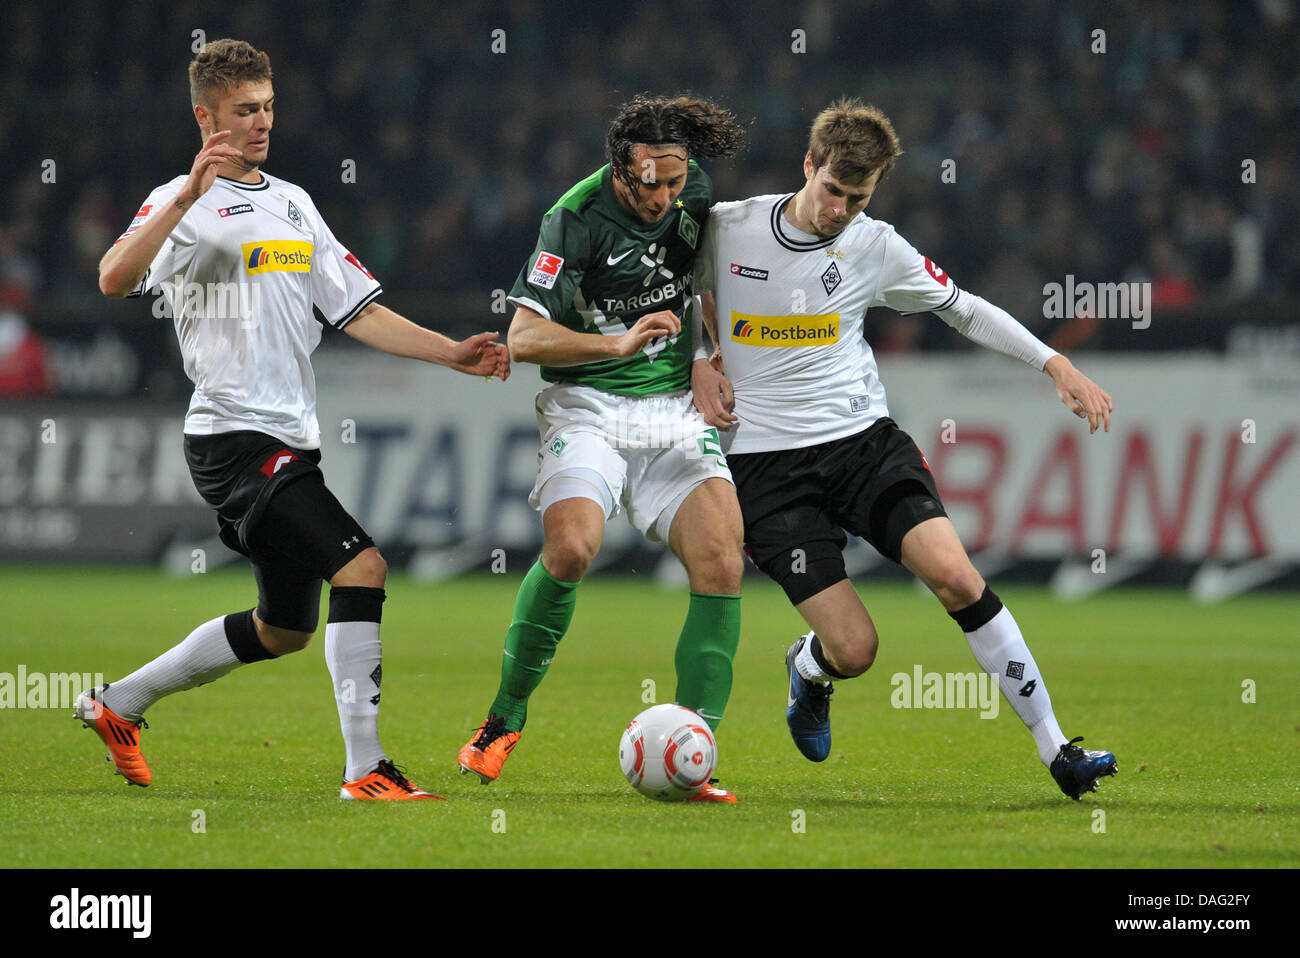 Bremen's Claudio Pizarro fights for the ball against Moenchengladbach's players Roman Neustaedter (L) and Patrick Herrmann (R) during the Bundesliga soccer match between Werder Bremen and Borussia Moenchengladbach at the Weser Stadium in Bremen, Germany, 12 March 2011. Photo: Carmen Jaspersen Stock Photo